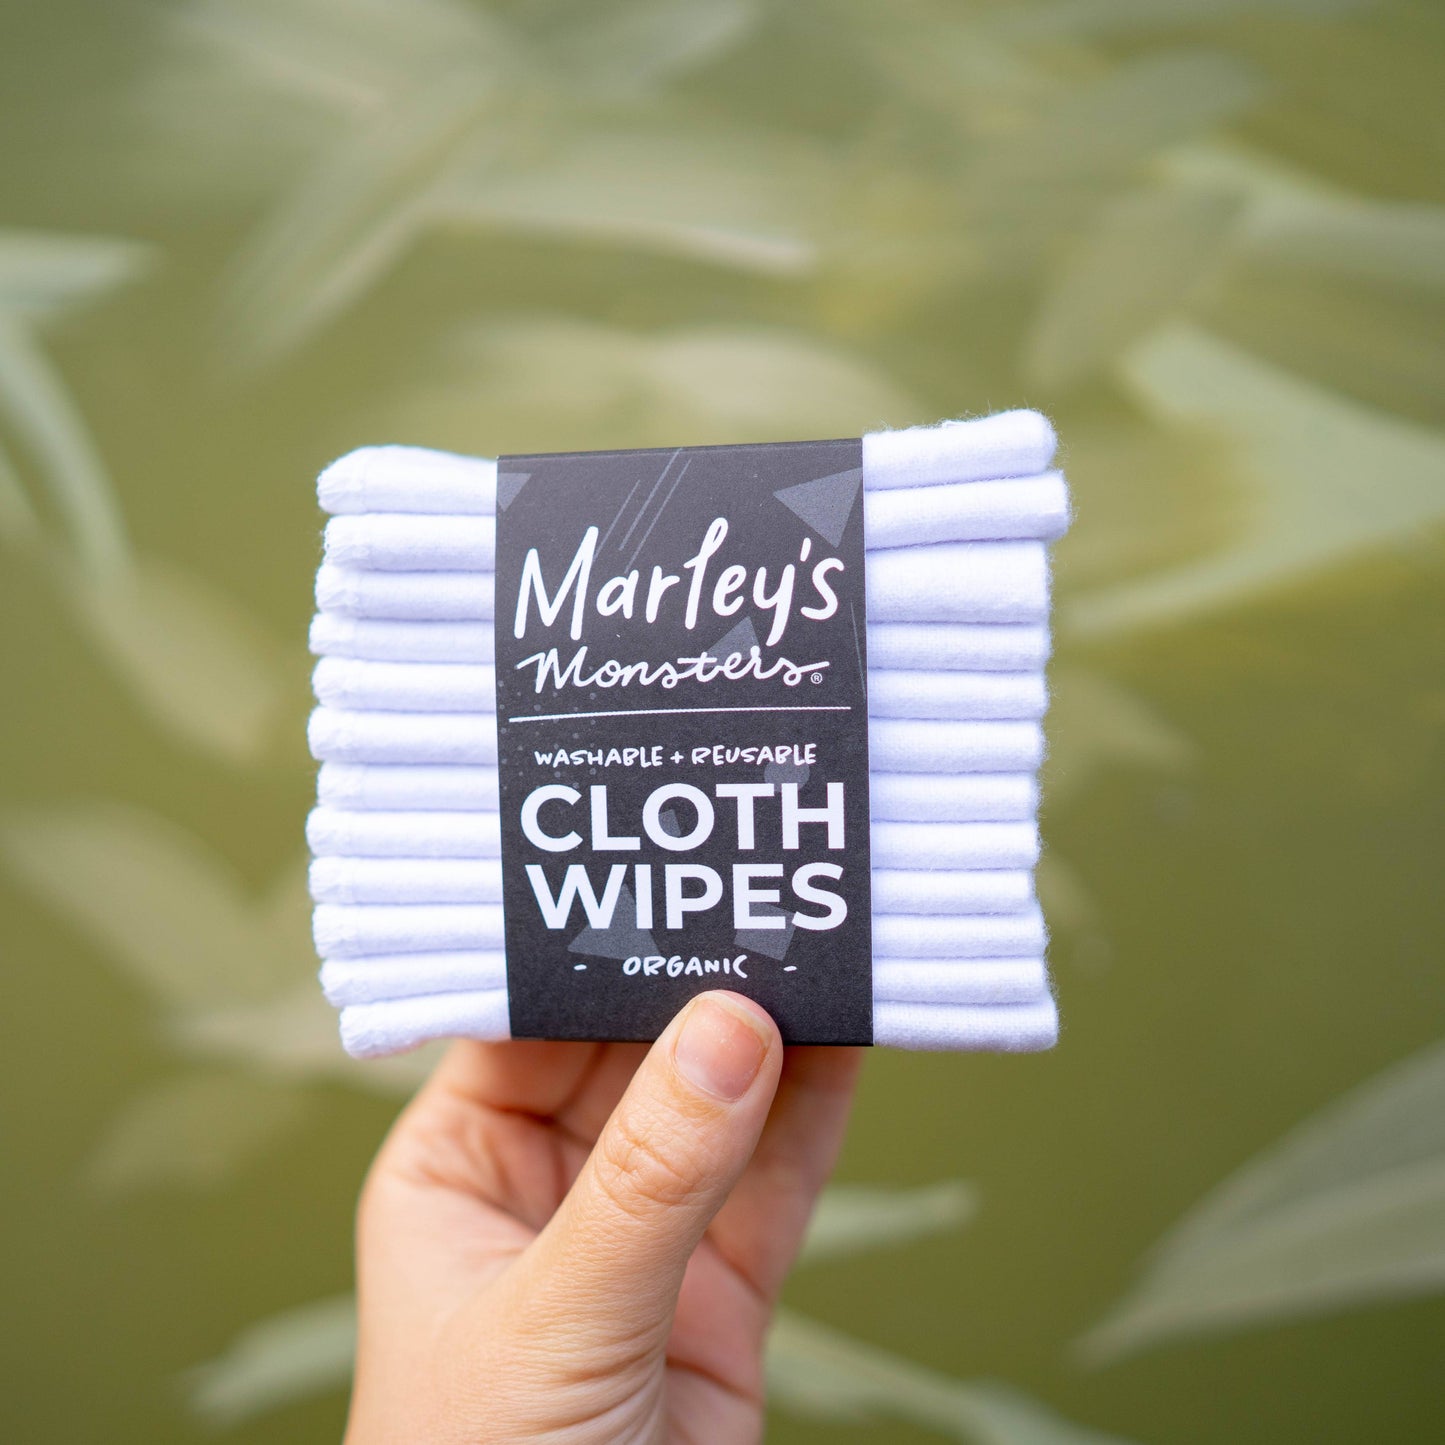 Marley's Monsters - CLOTH WIPES: Organic